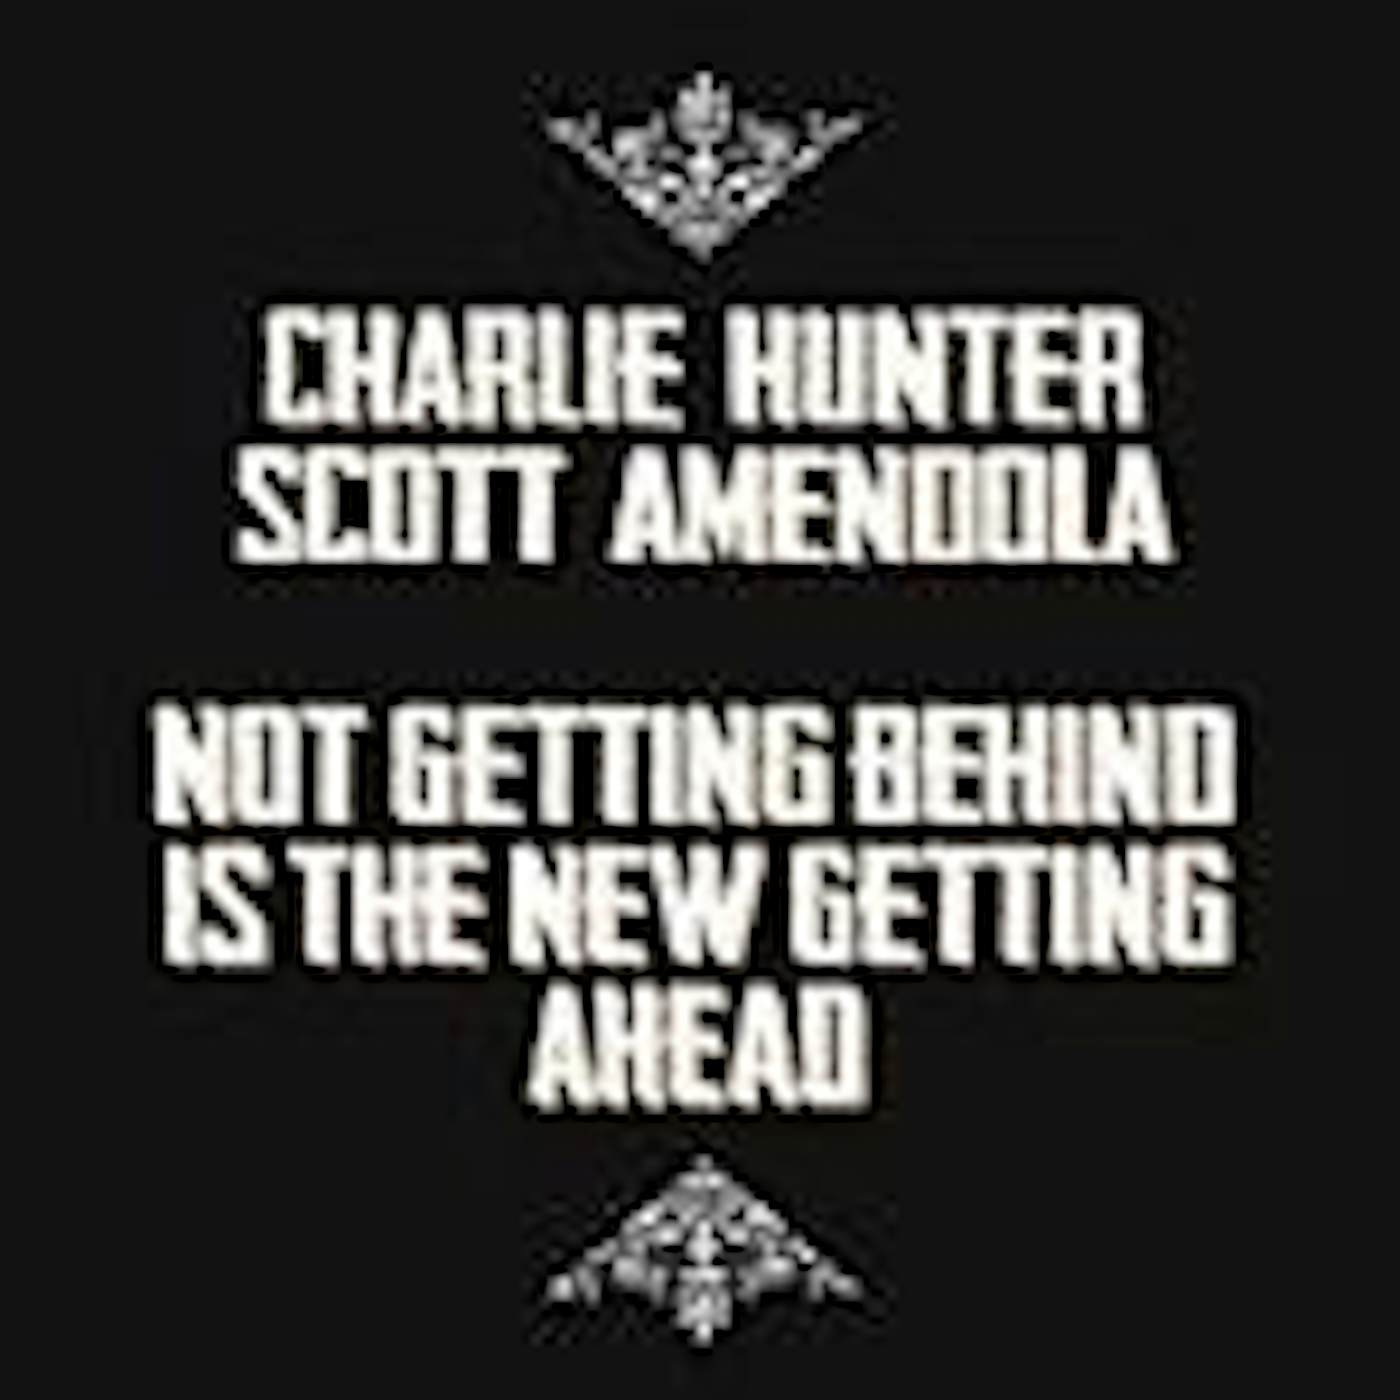 Charlie Hunter NOT GETTING BEHIND IS THE NEW GETTING AHEAD CD